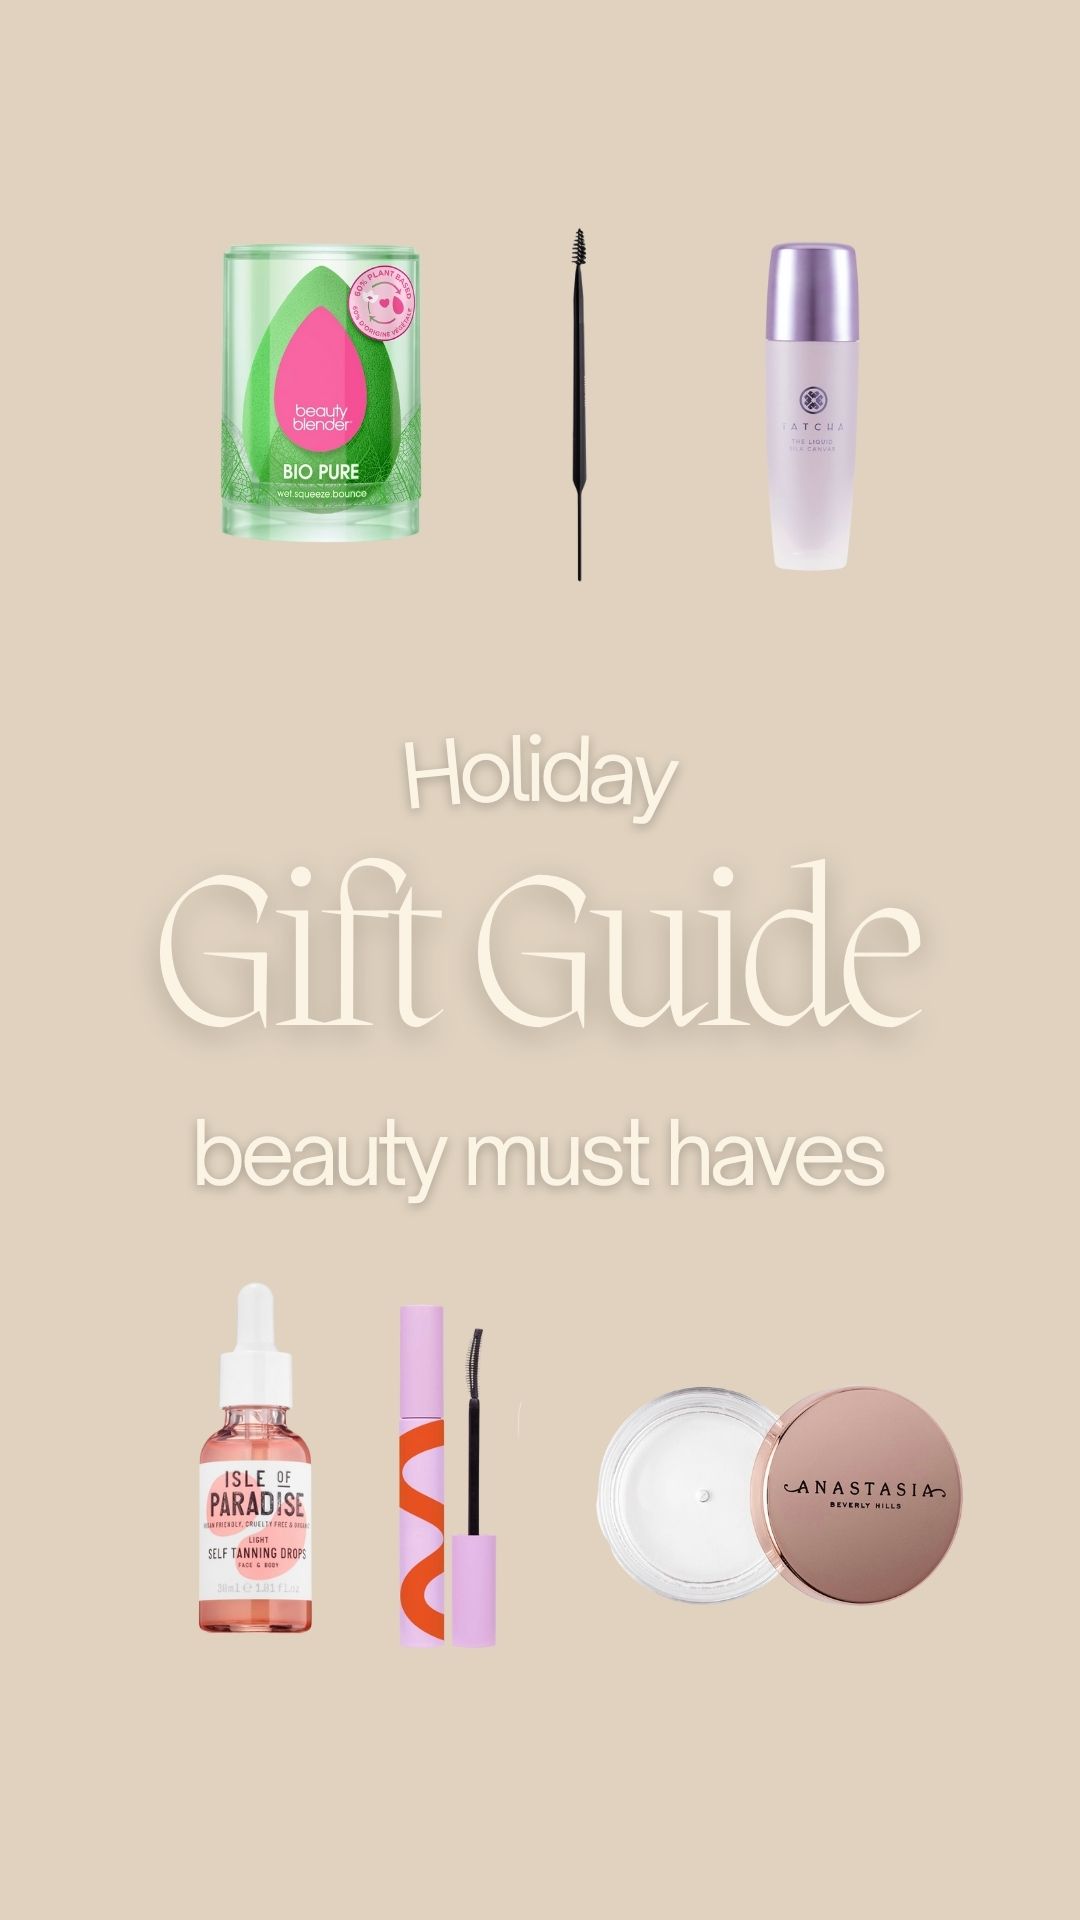 Minimal Makeup holiday gift guide from sephora